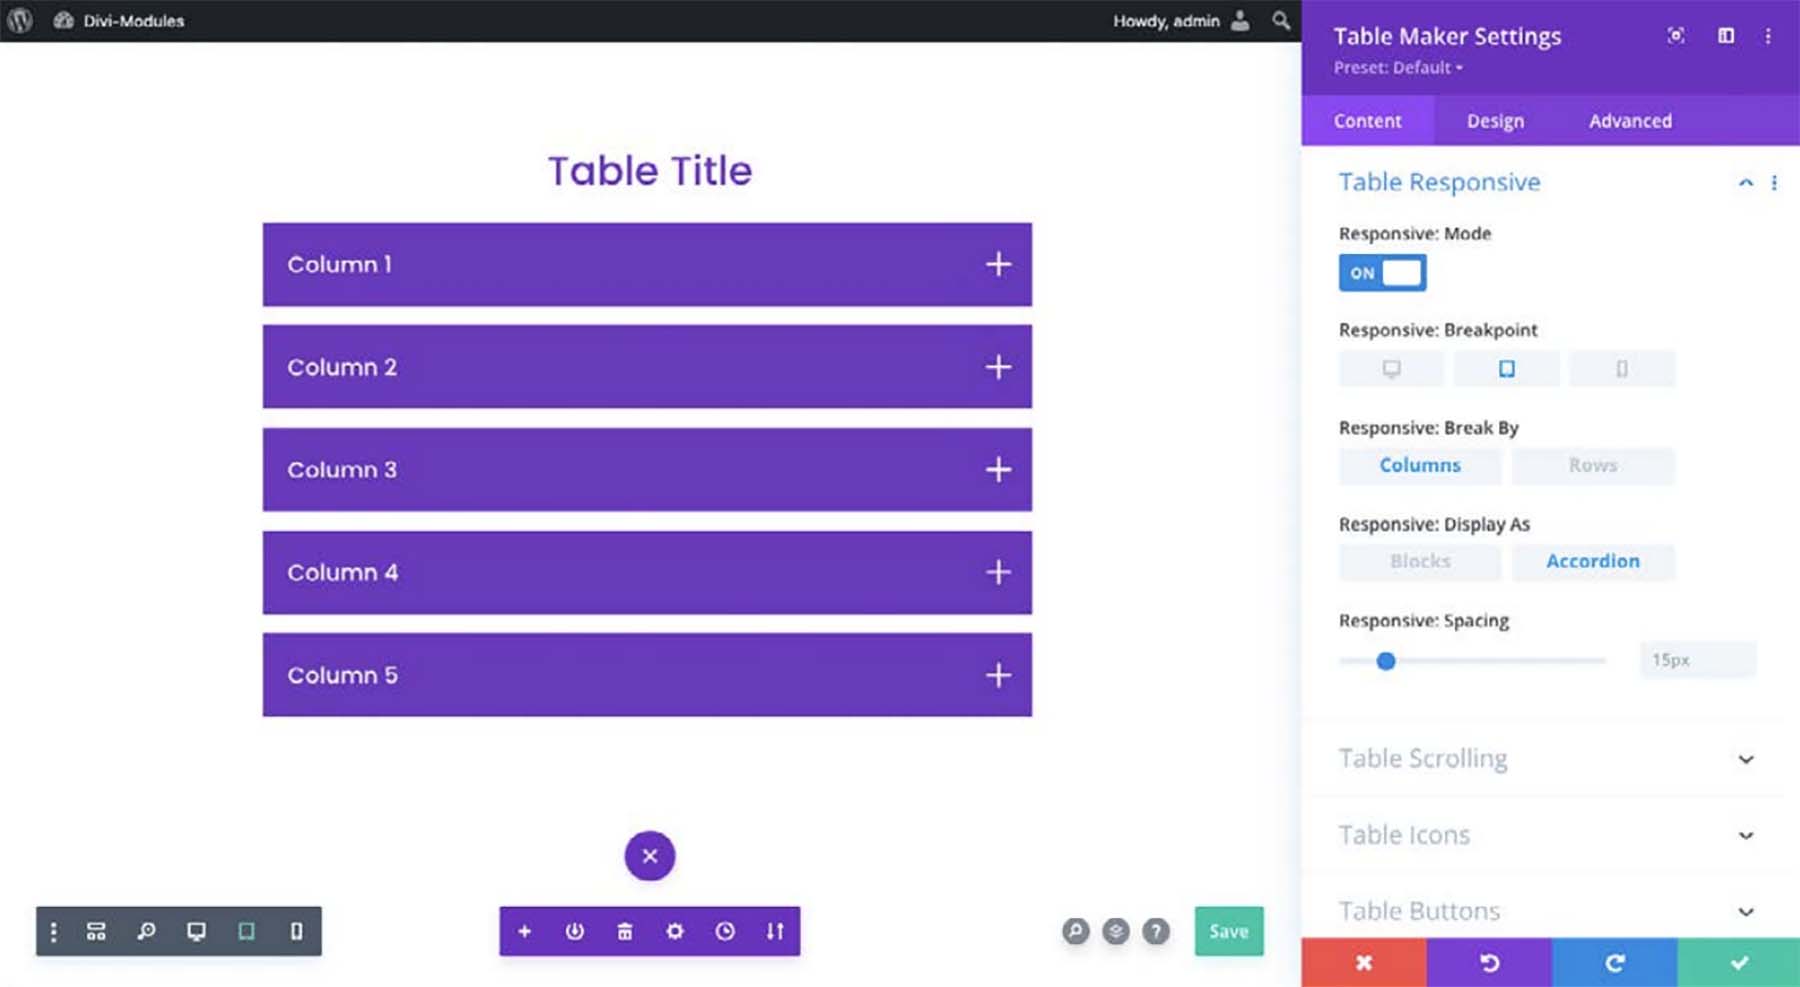 TableMaker responsive layouts